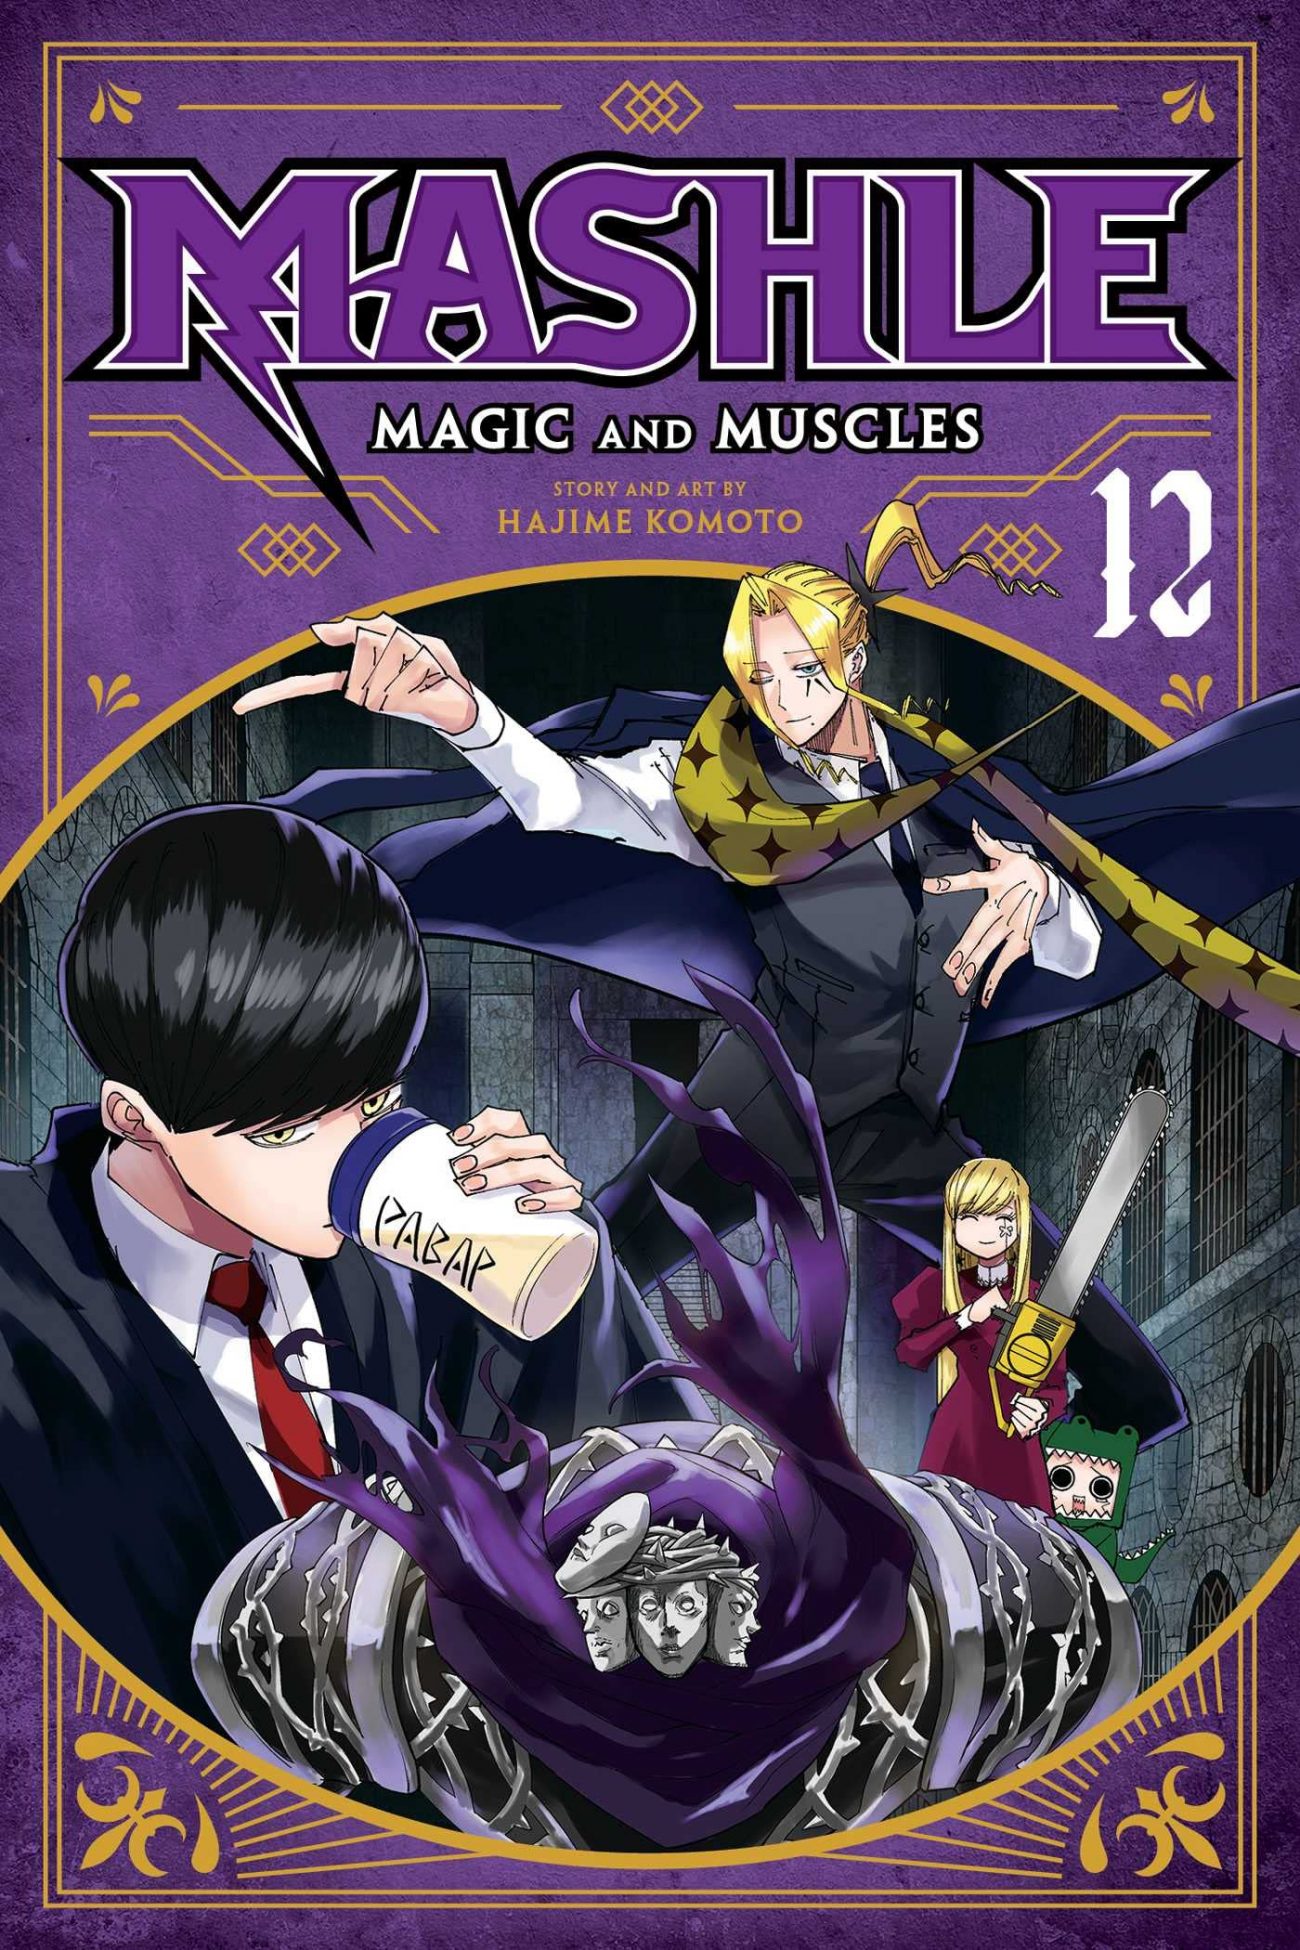 Mashle: Magic And Muscles Episode 4 Release Date And Time